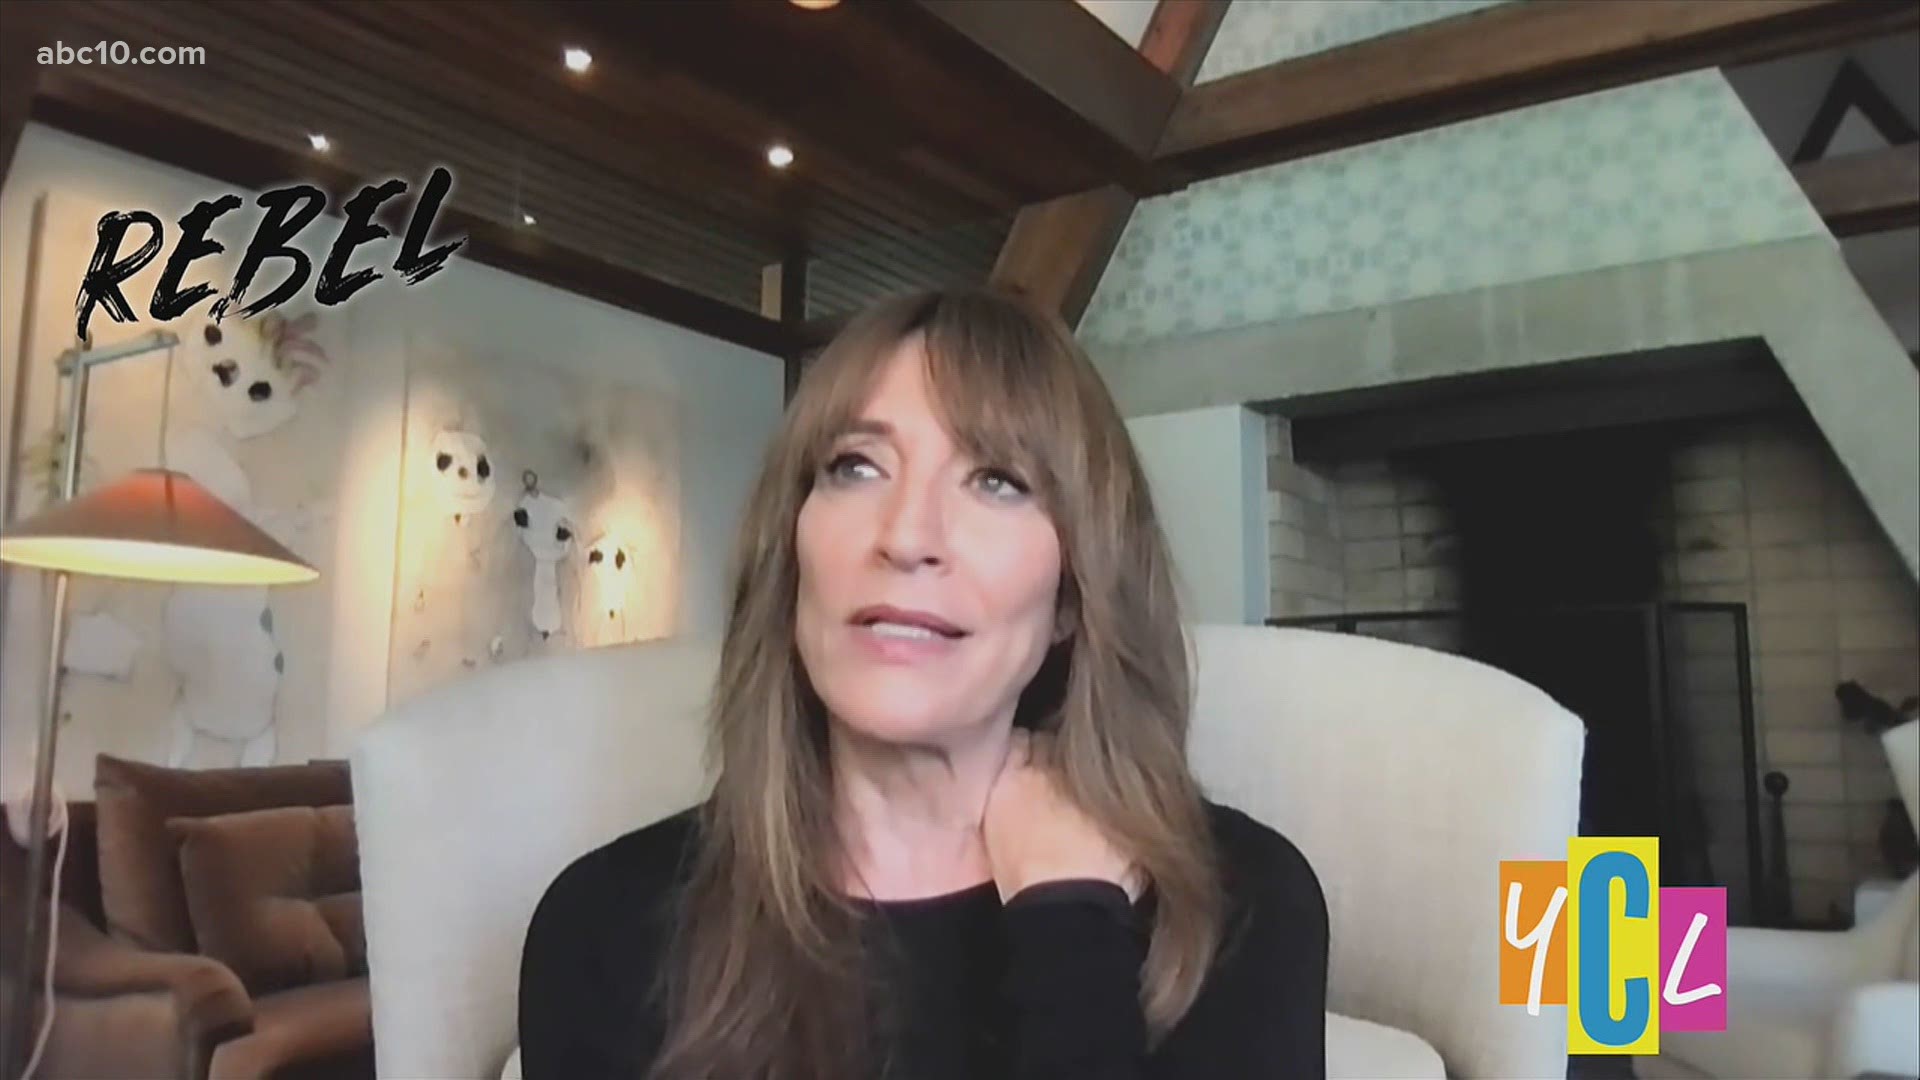 Actress Katey Sagal tells us about her new role in the series, ‘Rebel’ inspired by the life of activist, Erin Brockovich. The drama premieres in on ABC on April 8th.